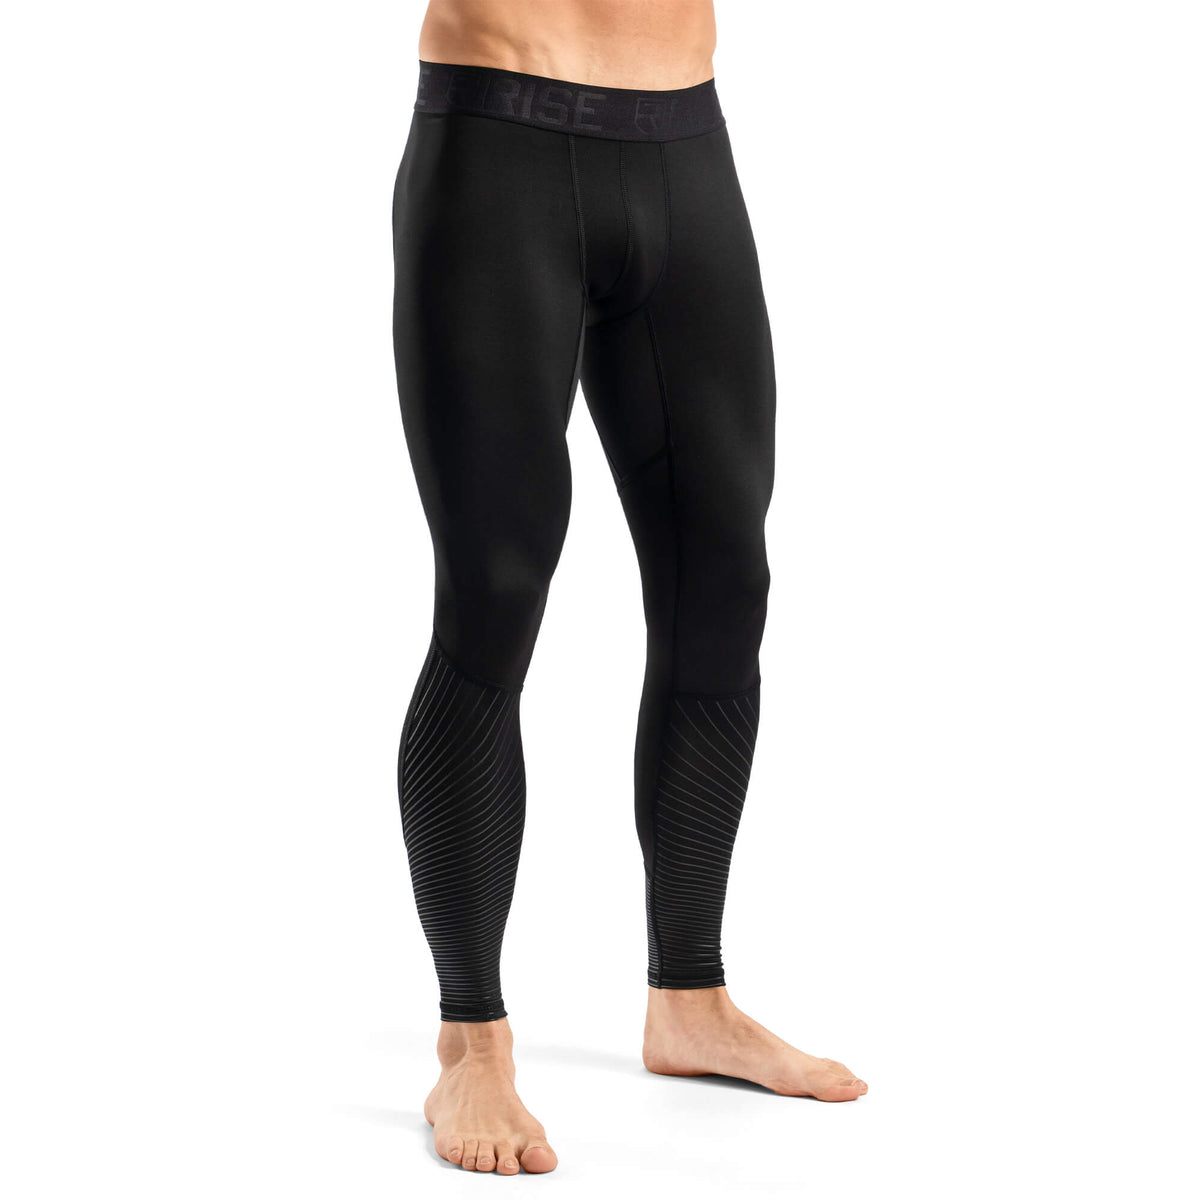 Men's Compression Pants for sale in Calgary, Alberta, Facebook Marketplace